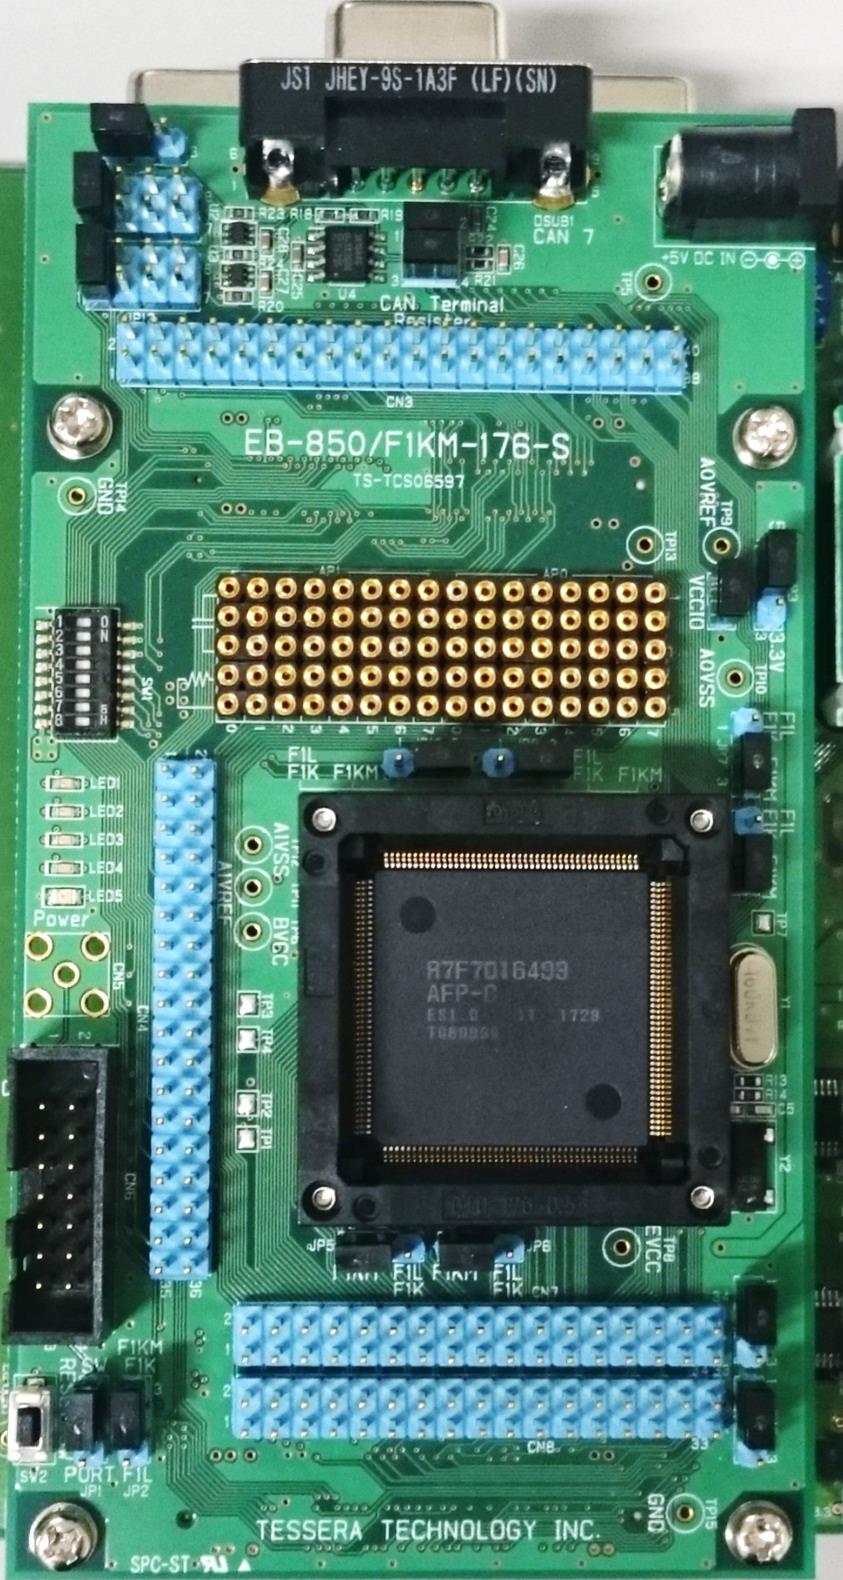 2.6 CPU Board "EB-850/F1KM-176-S" is mounted on the CPU board CAN Power Check